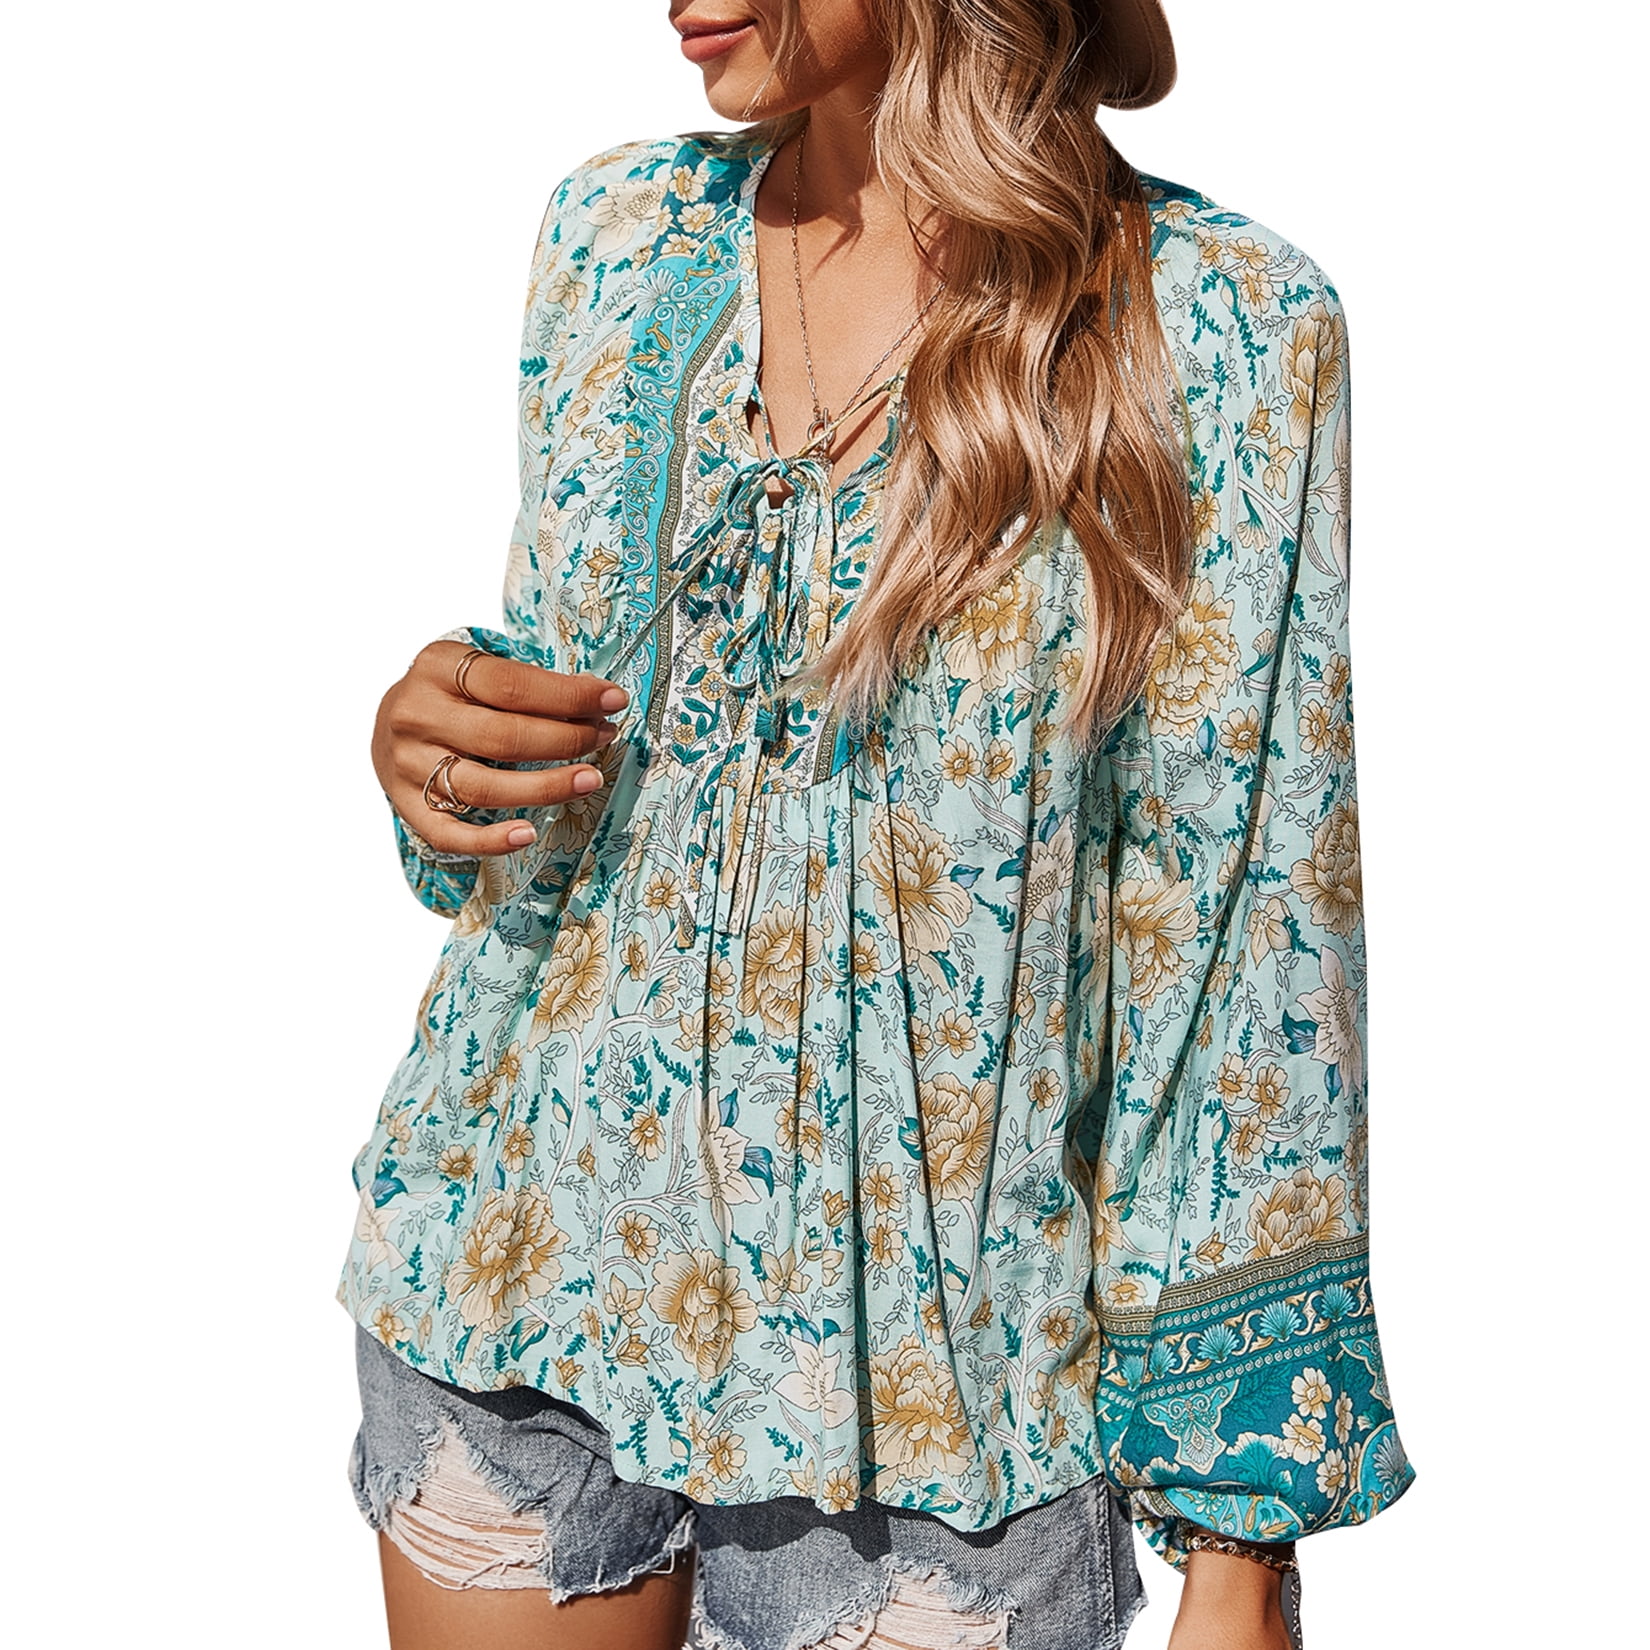 Bohemian Vintage Printed Boho Shirts Womens Long Sleeve Top For Clothes  From Blueberry12, $15.3